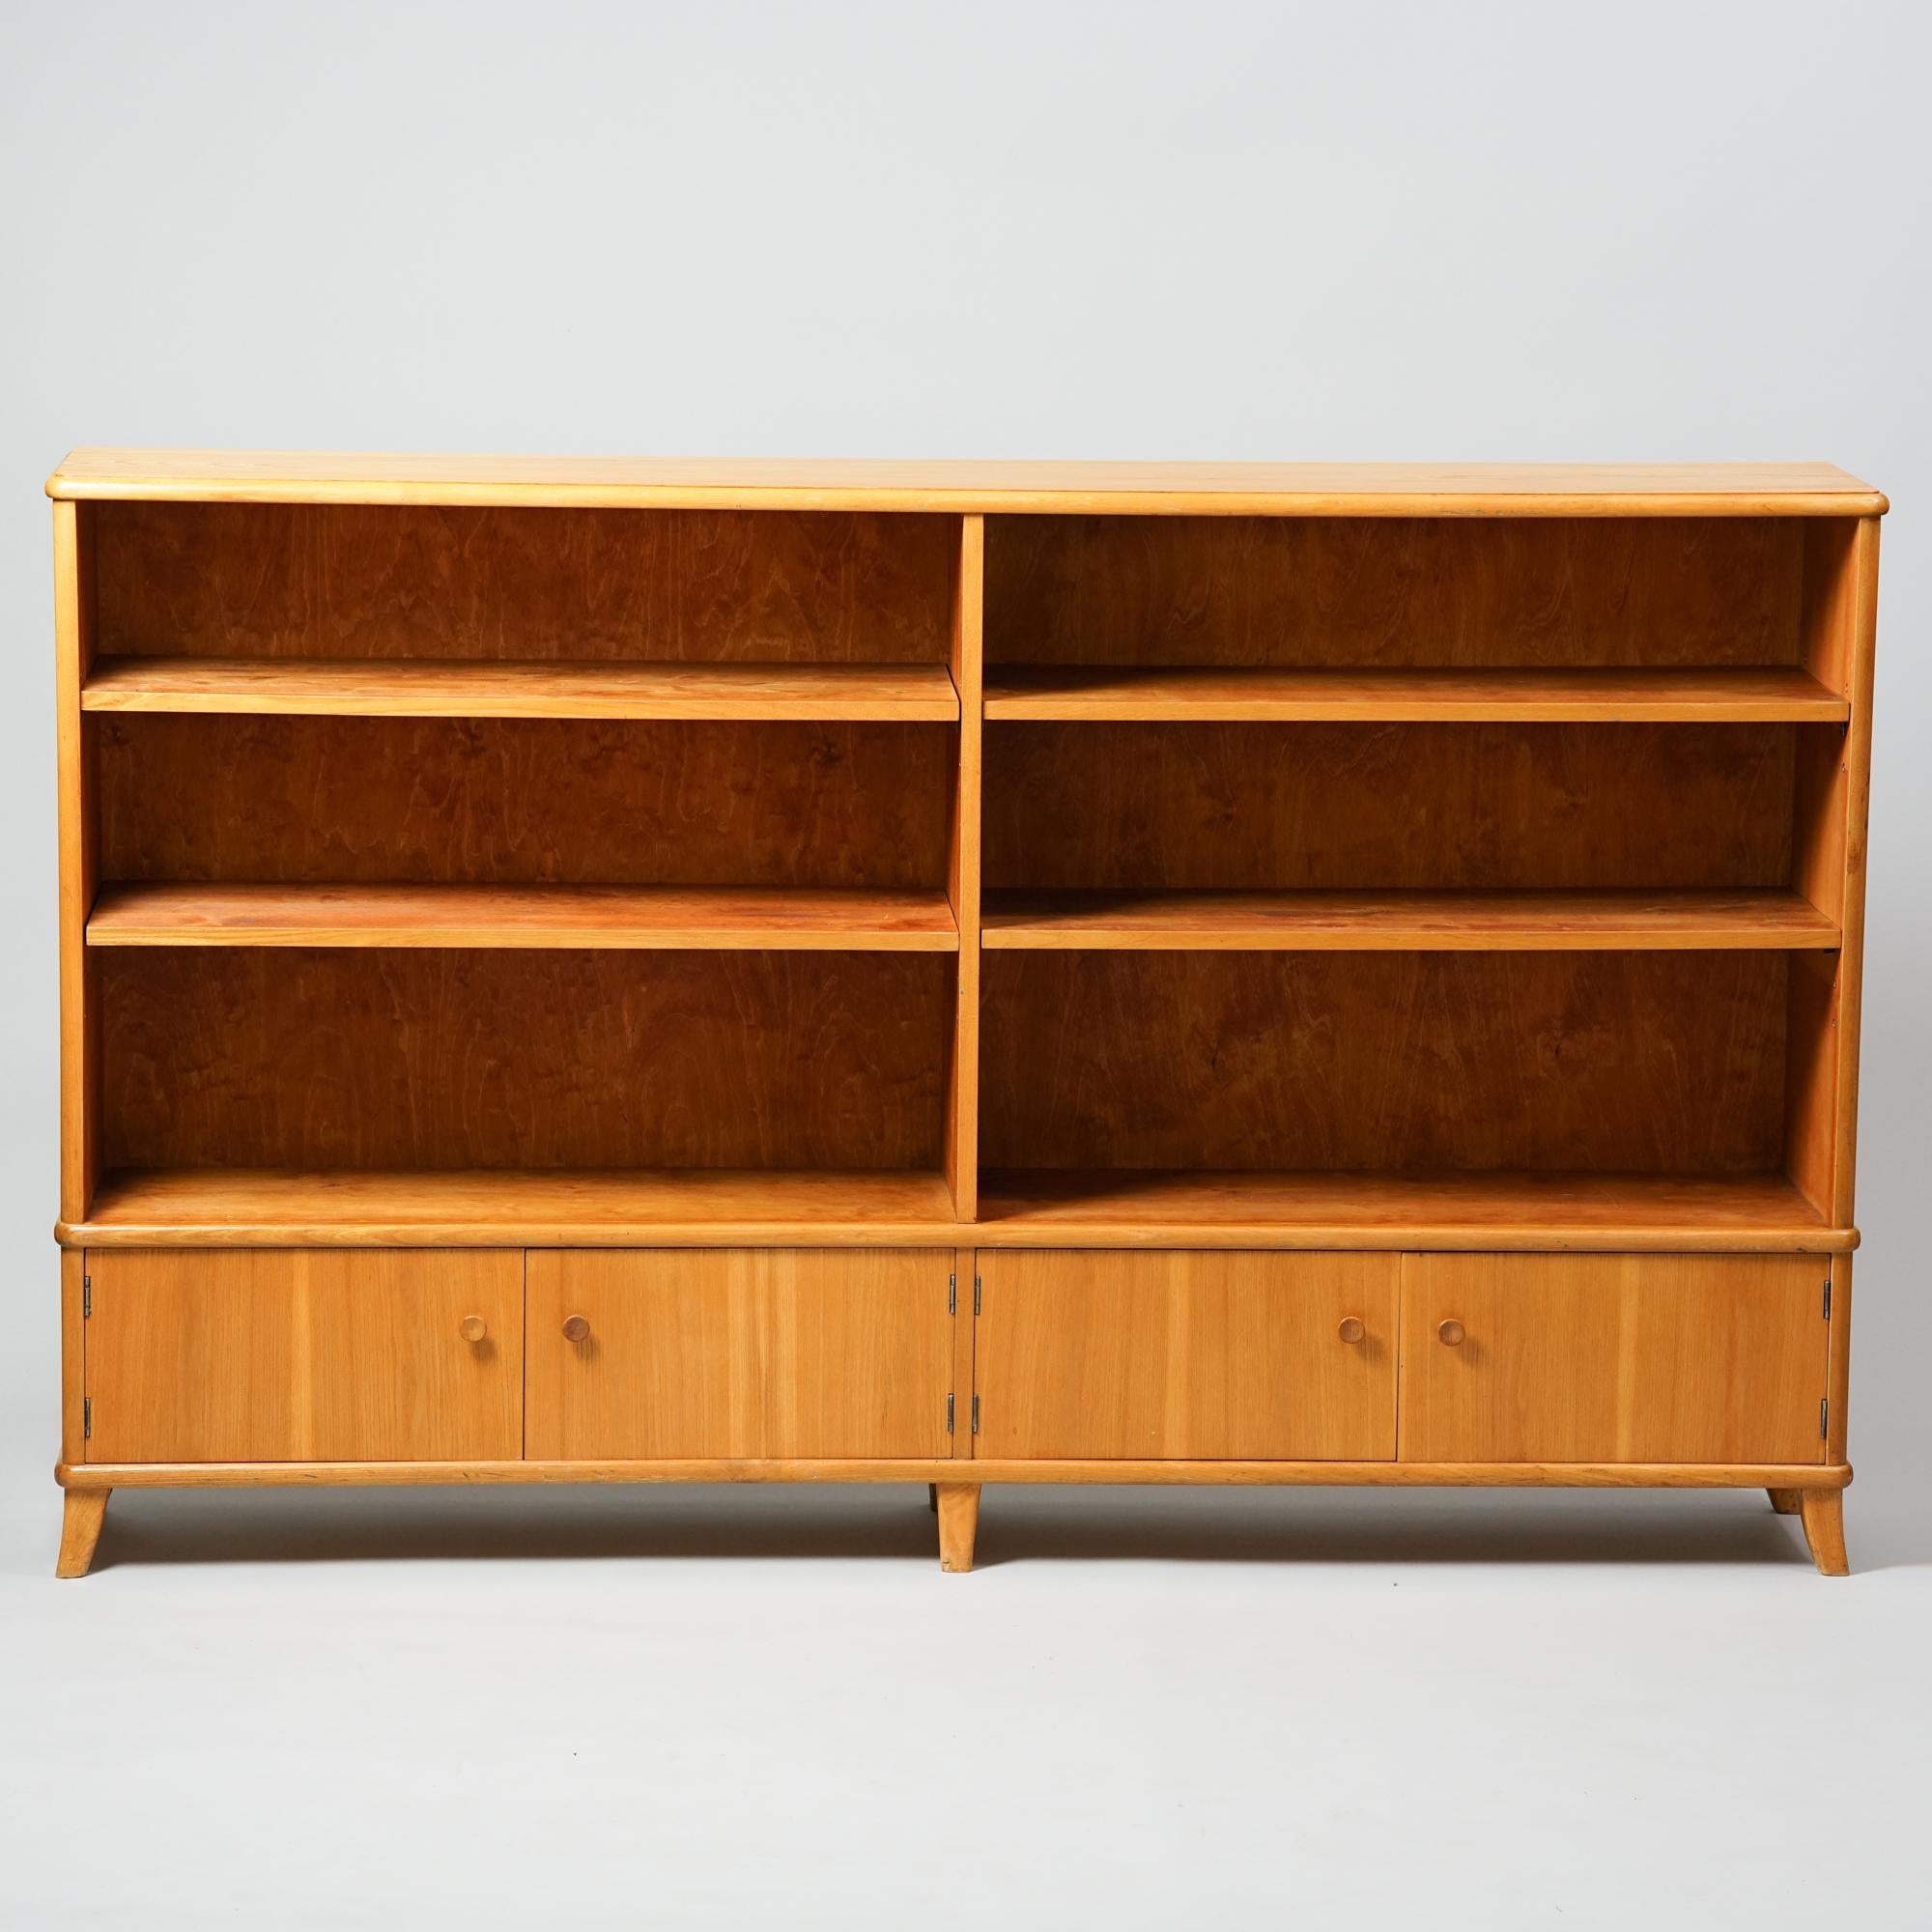 Finnish functionalist bookcase by Oy Boman Ab in the 1940s. Elm and birch. Adjustable shelf height. Good condition, the piece has been restored. Classic Mid-Century Modern functionalist design.